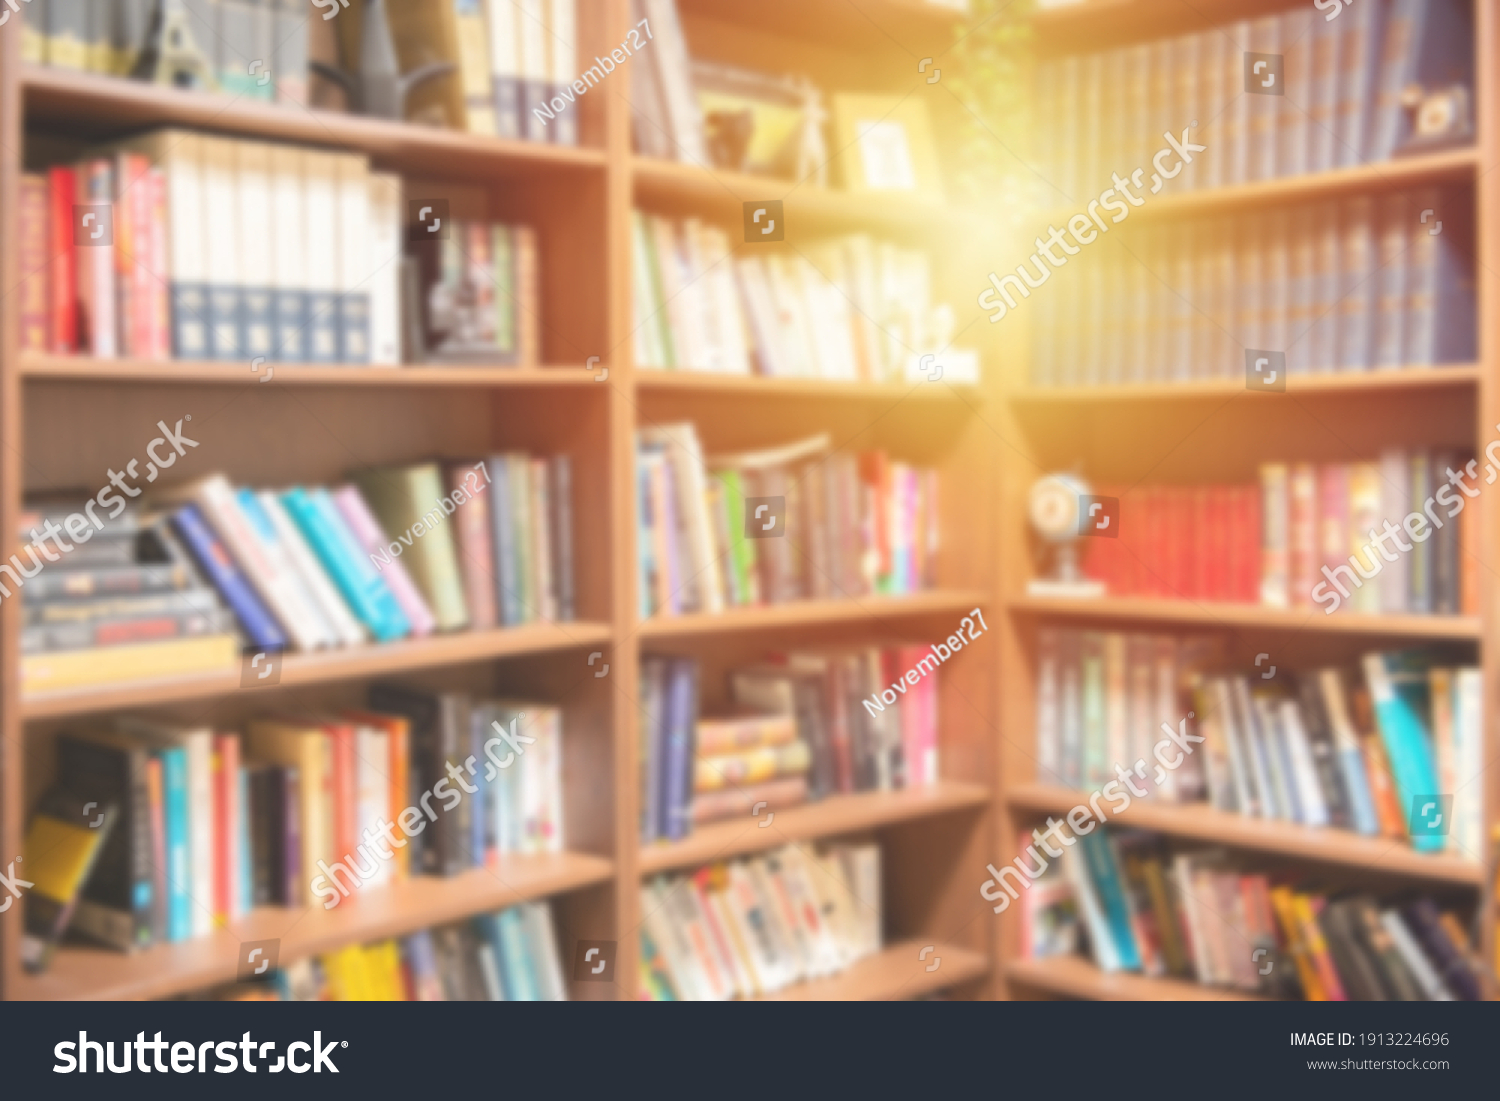 Abstract blurred empty college library interior space. use for background or backdrop in book shop business or education resources concepts.Blurry classroom with bookshelves by defocused effect.  #1913224696